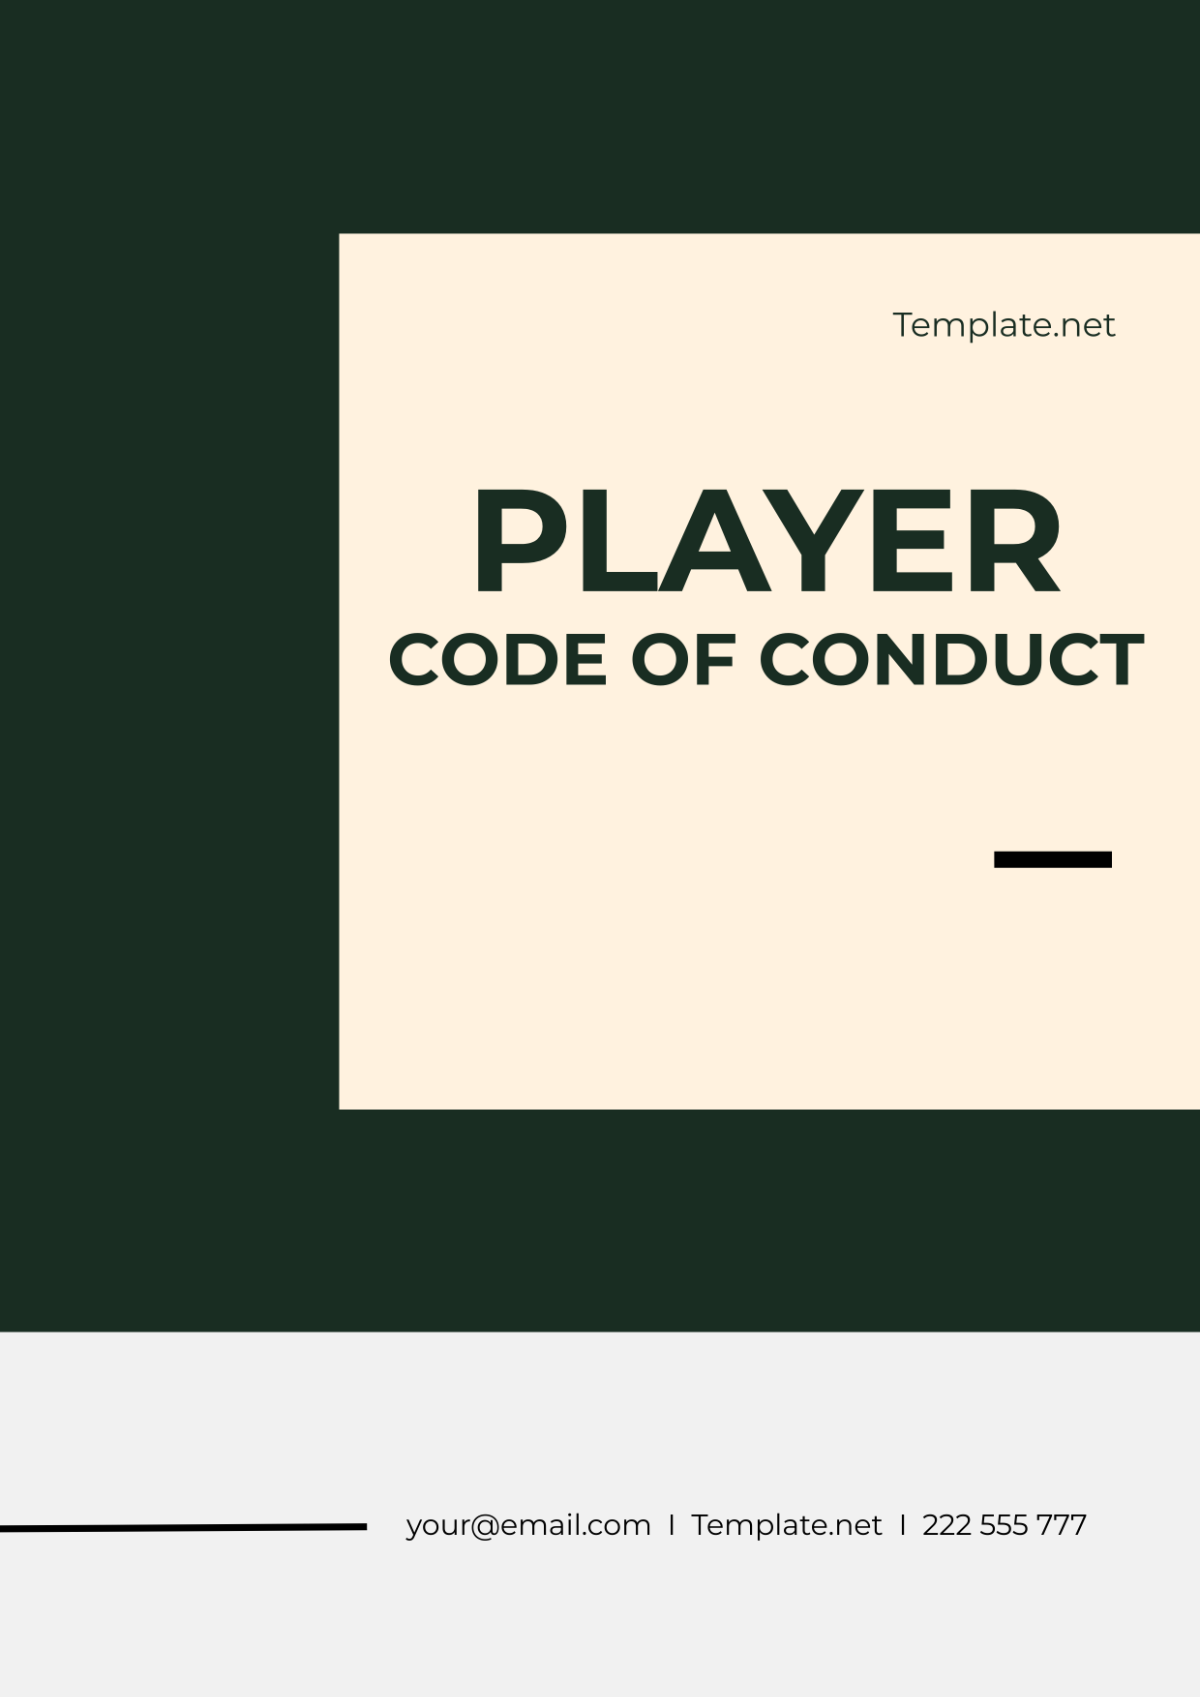 Player Code of Conduct Template